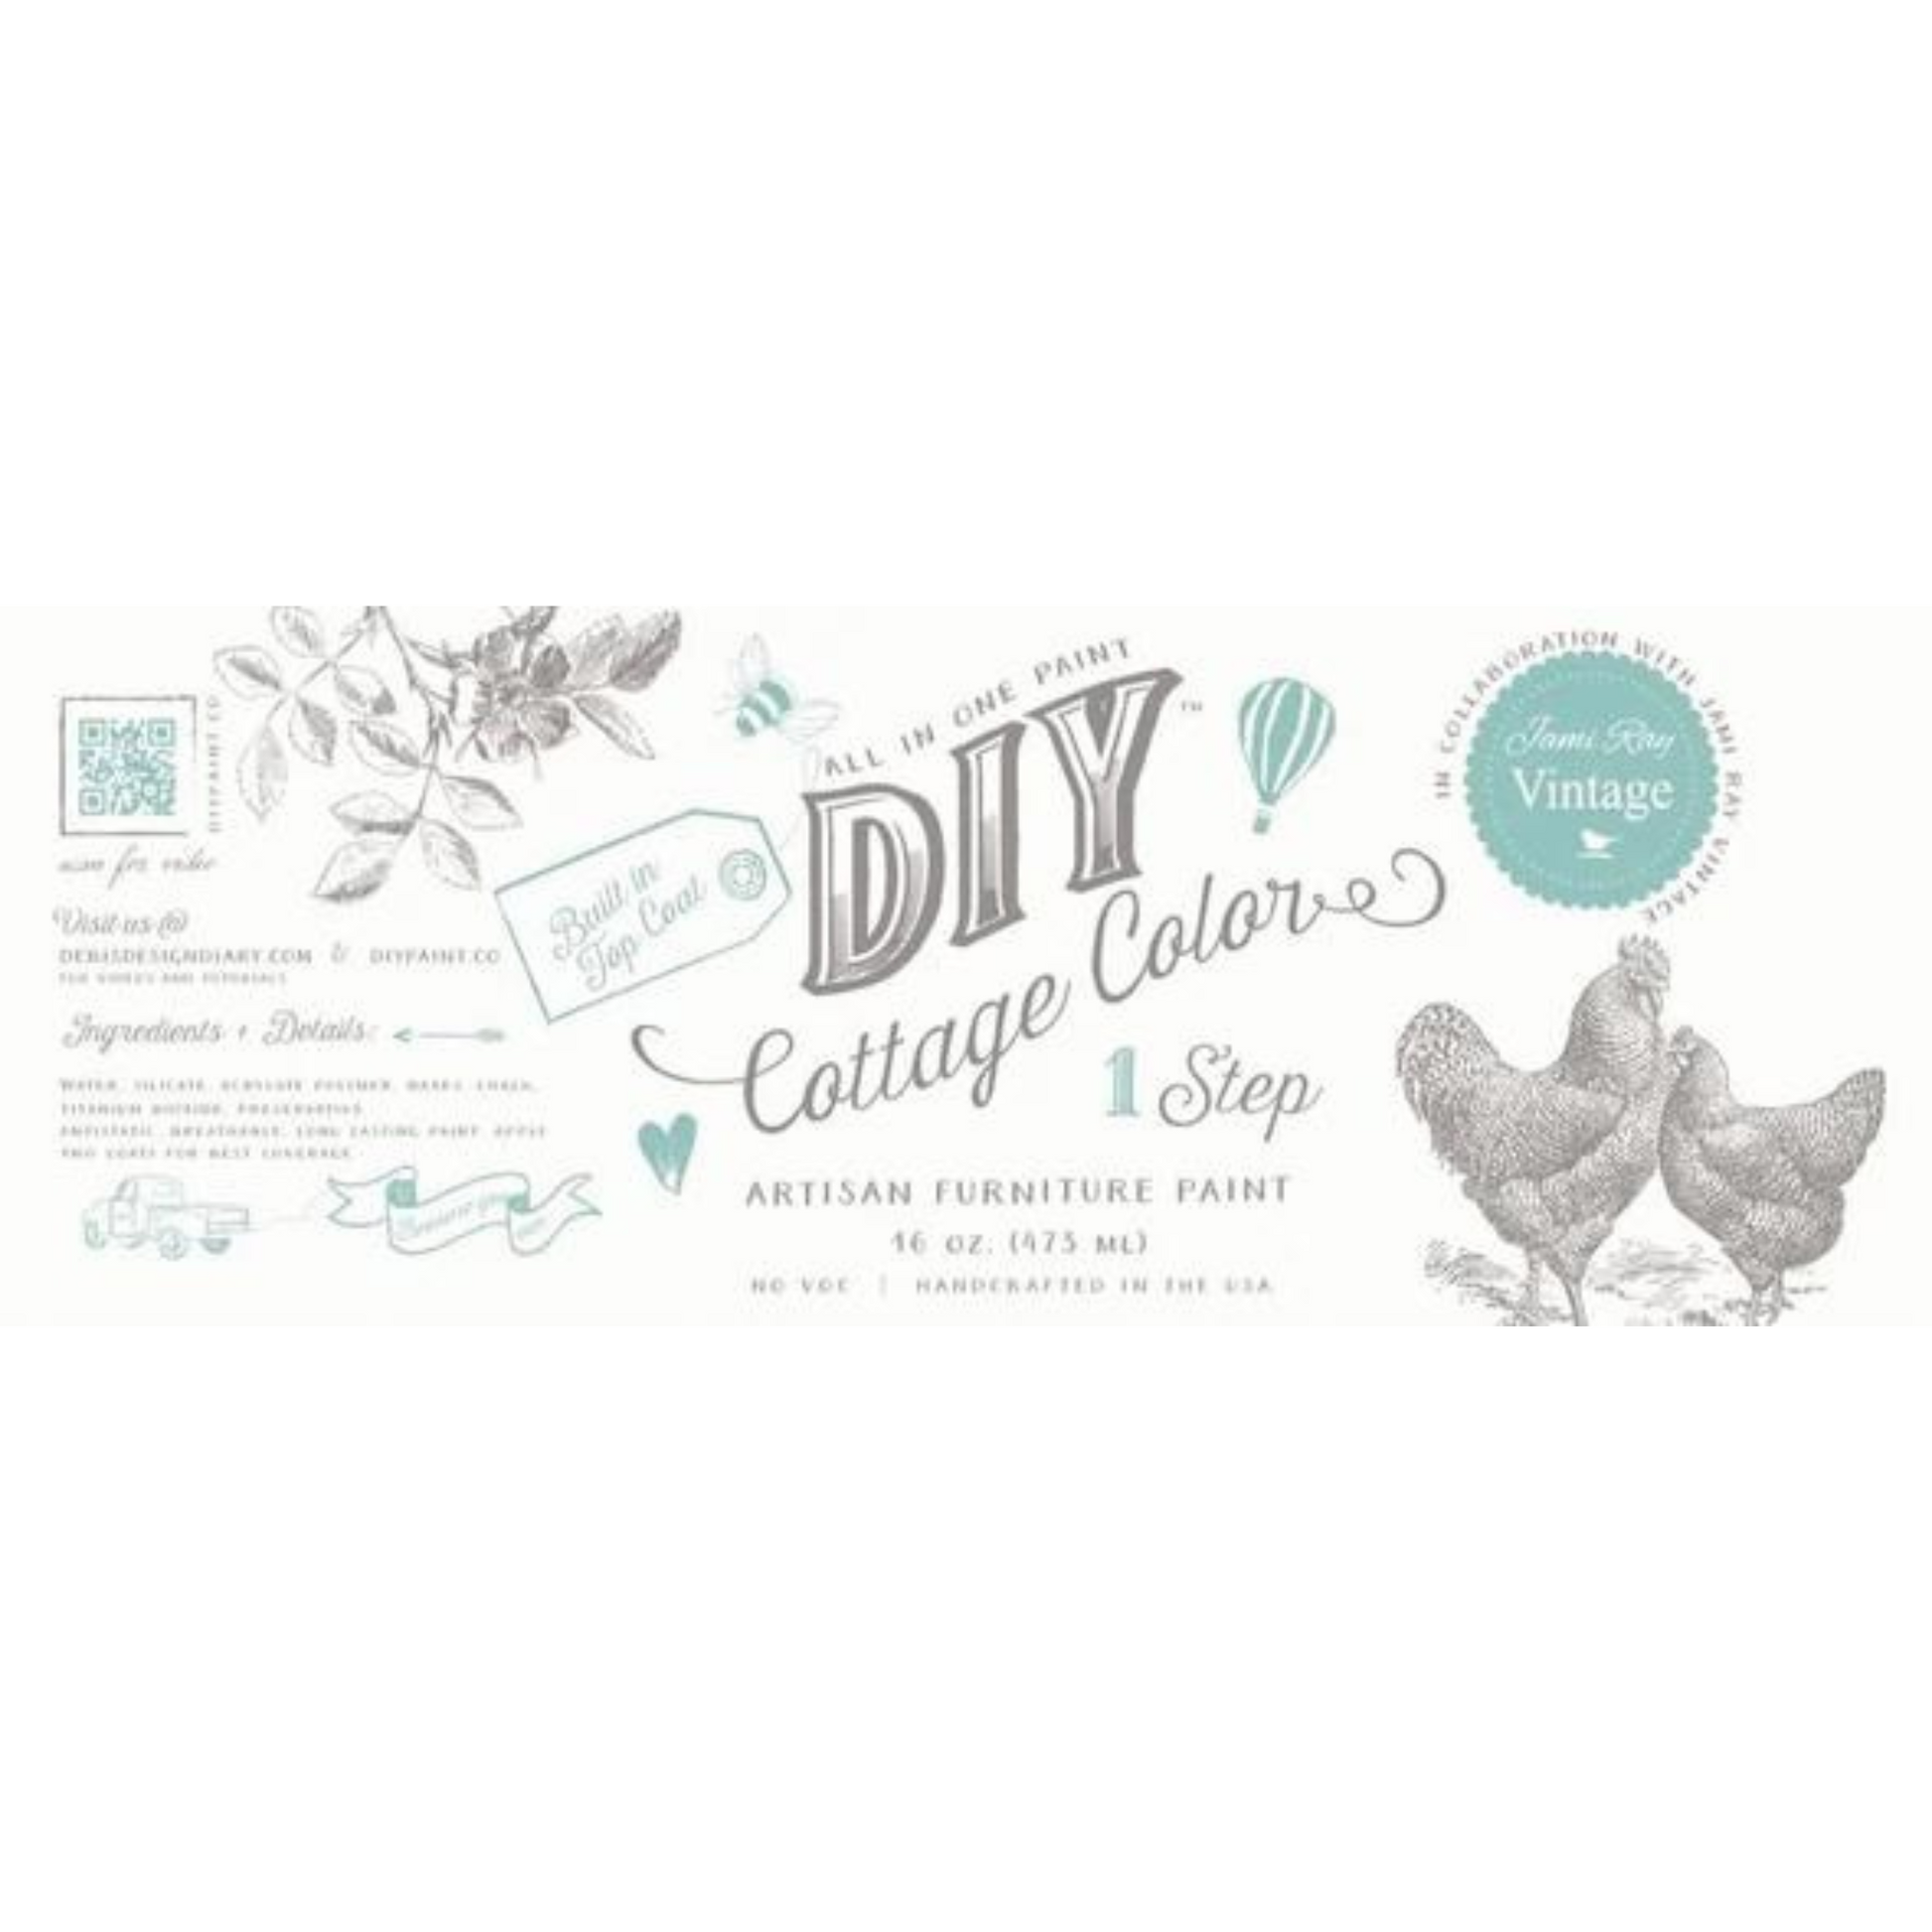 DIY Cottage Color Paints by DIY Paints exclusively curated by Jamie Ray Vintage. Product label detail. Pints available at Milton's Daughter.